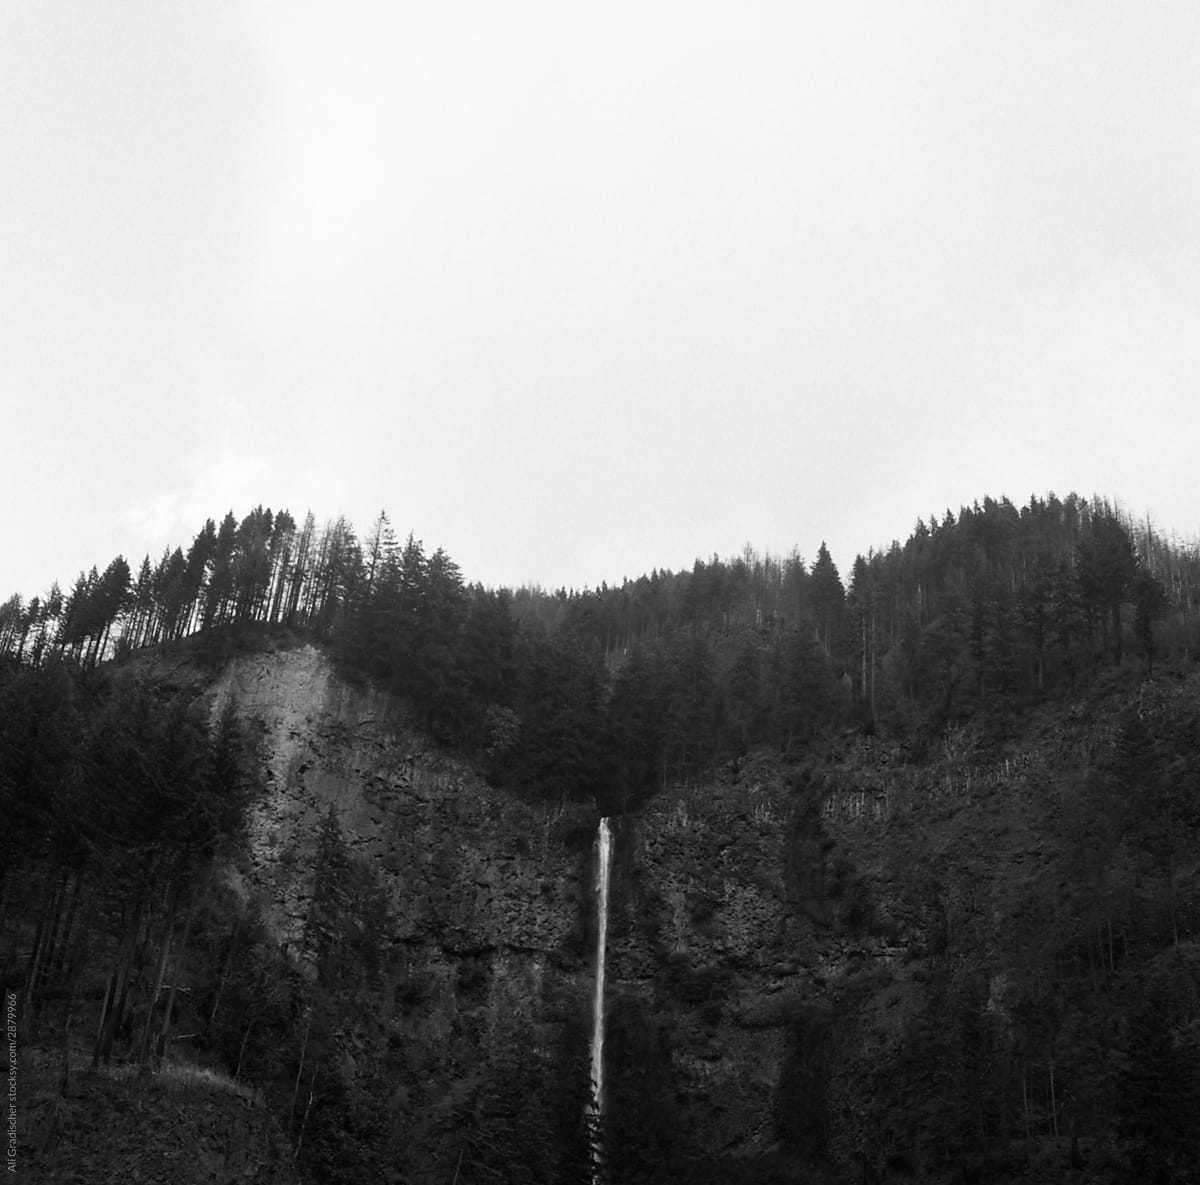 Oregon Waterfall in Black and White